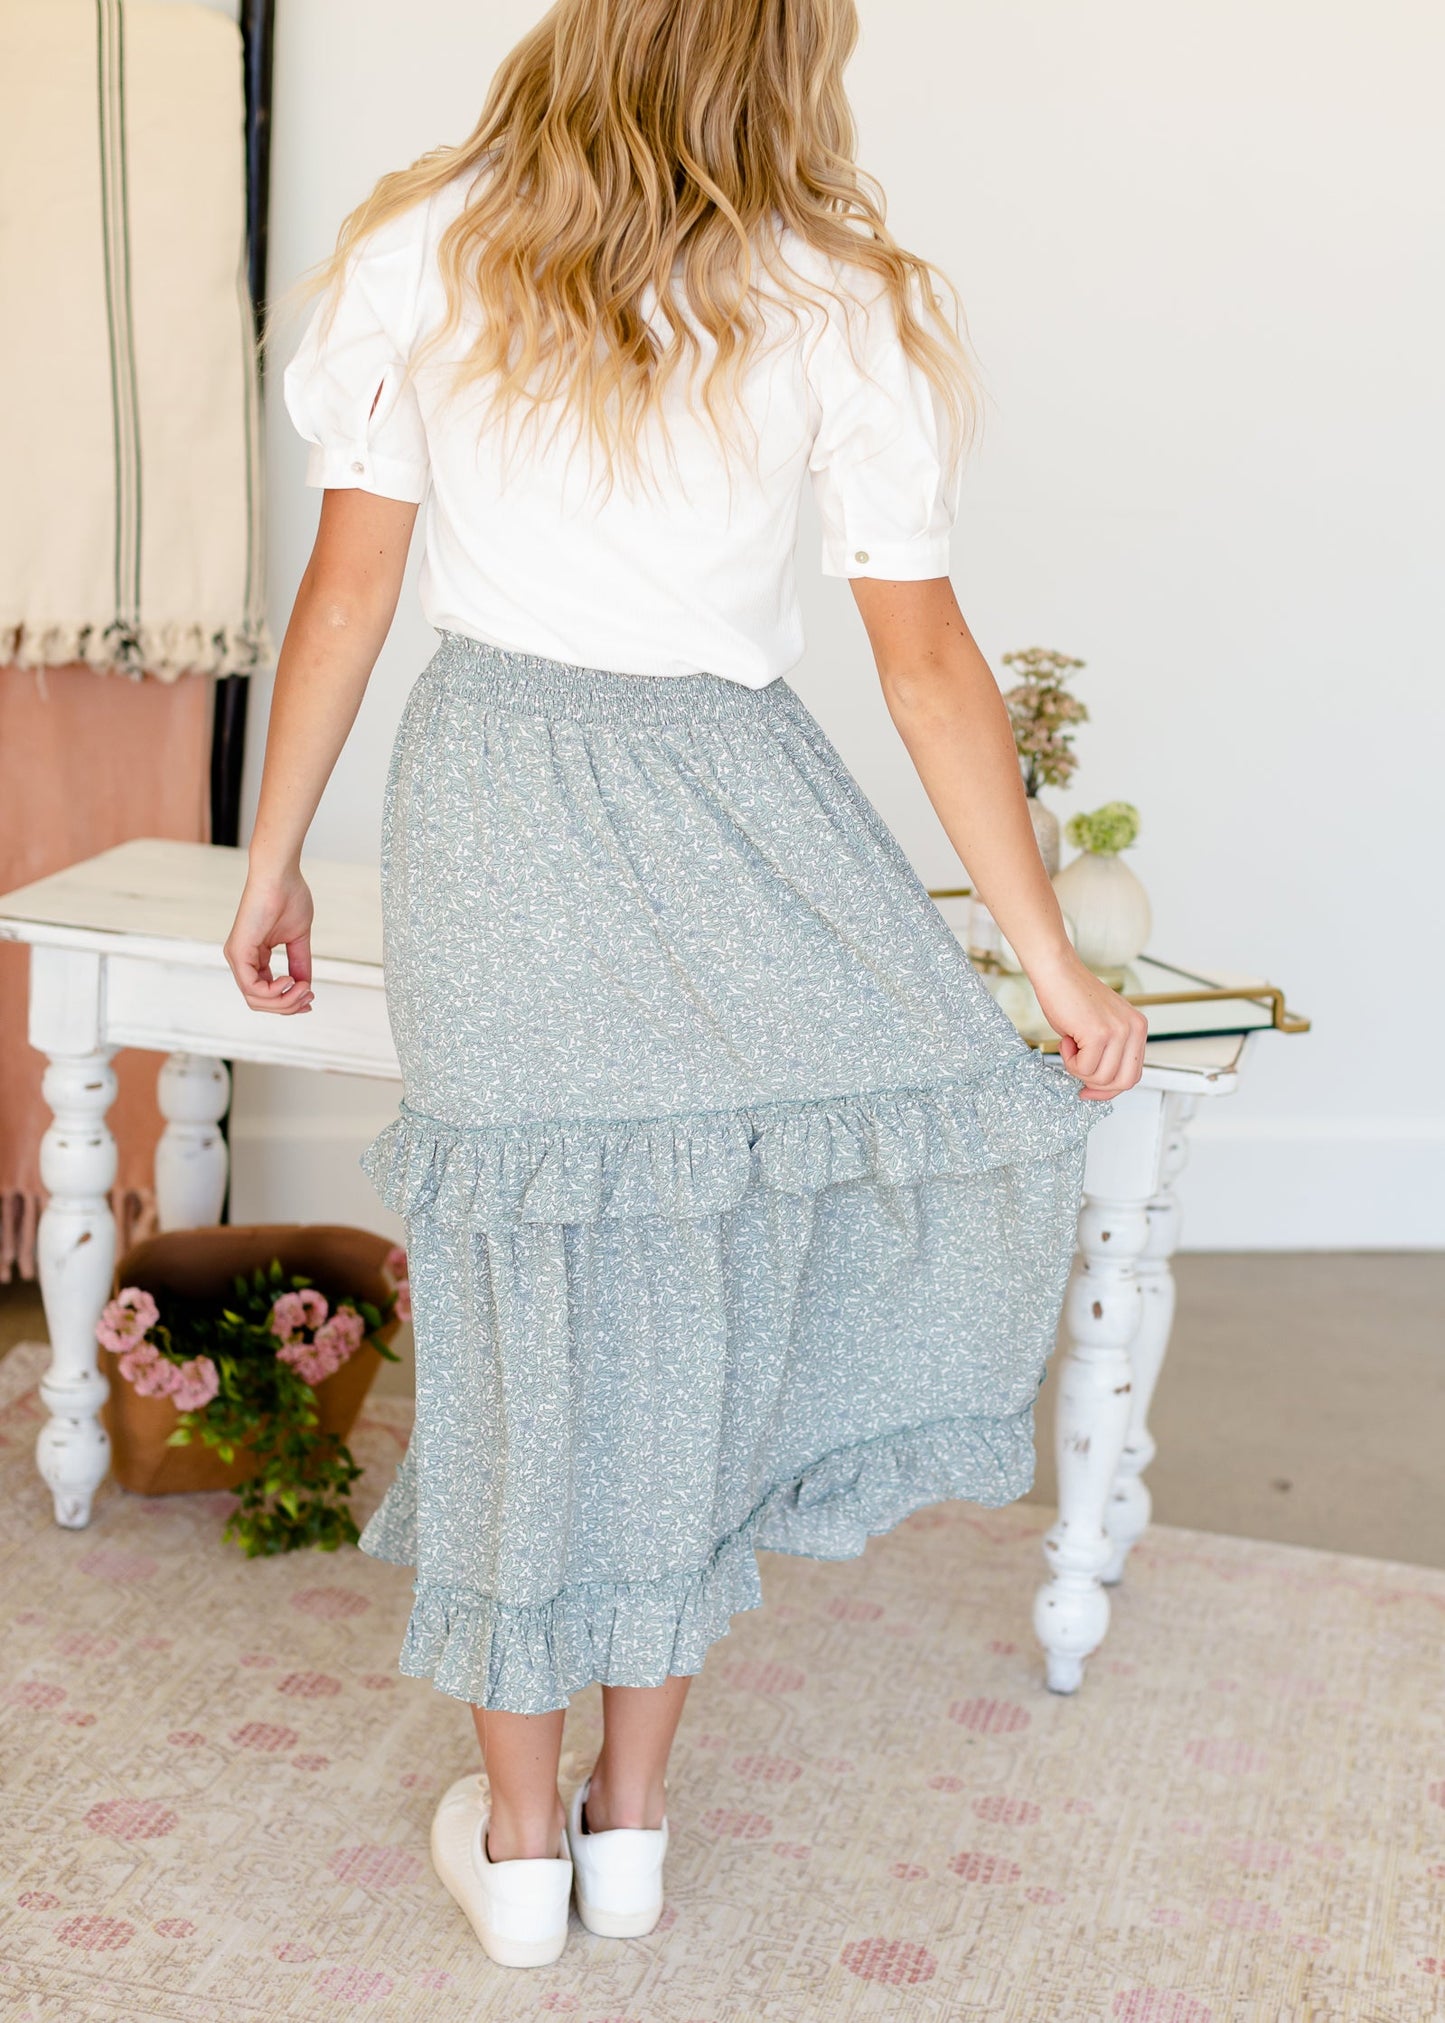 Lace Tiered Flowy Skirt - FINAL SALE Skirts